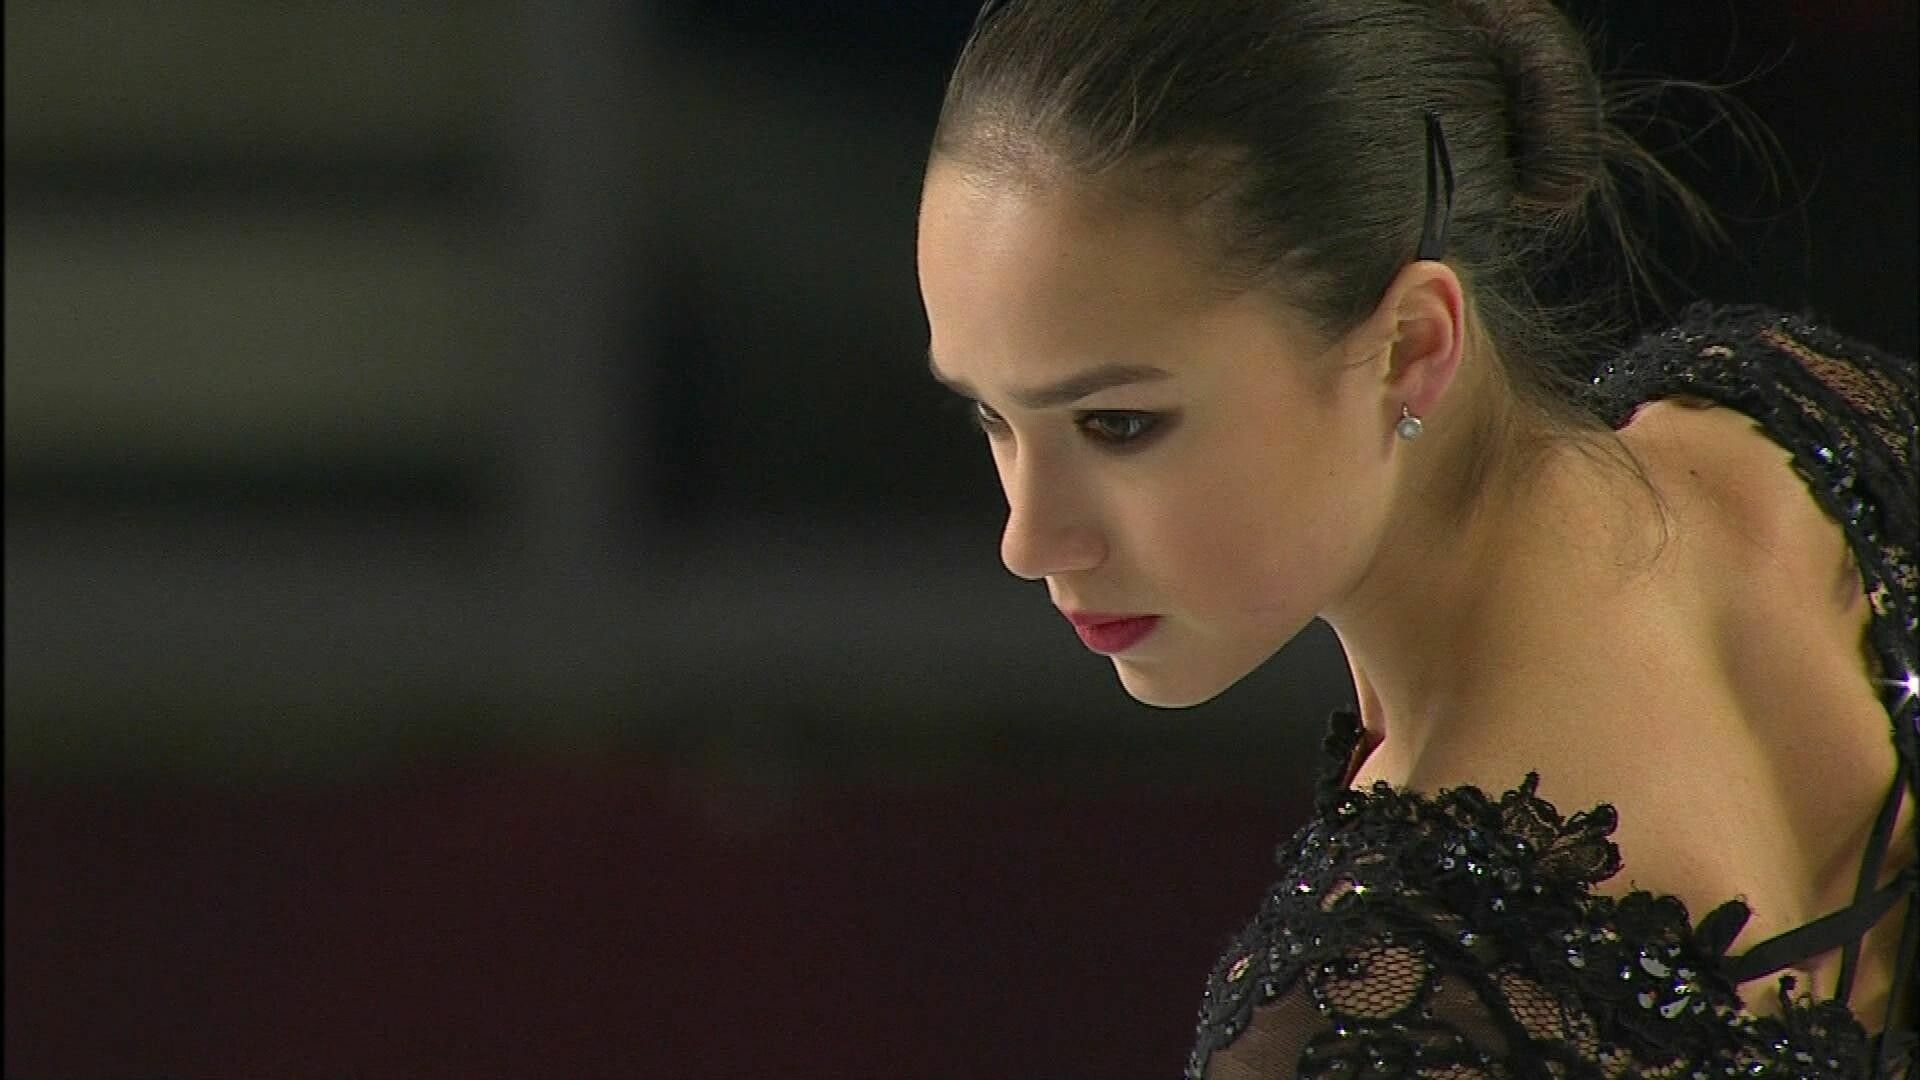 Alina Zagitova: She was ranked first in both programs and won the gold medal at the 2018 Rostelecom Cup. 1920x1080 Full HD Background.